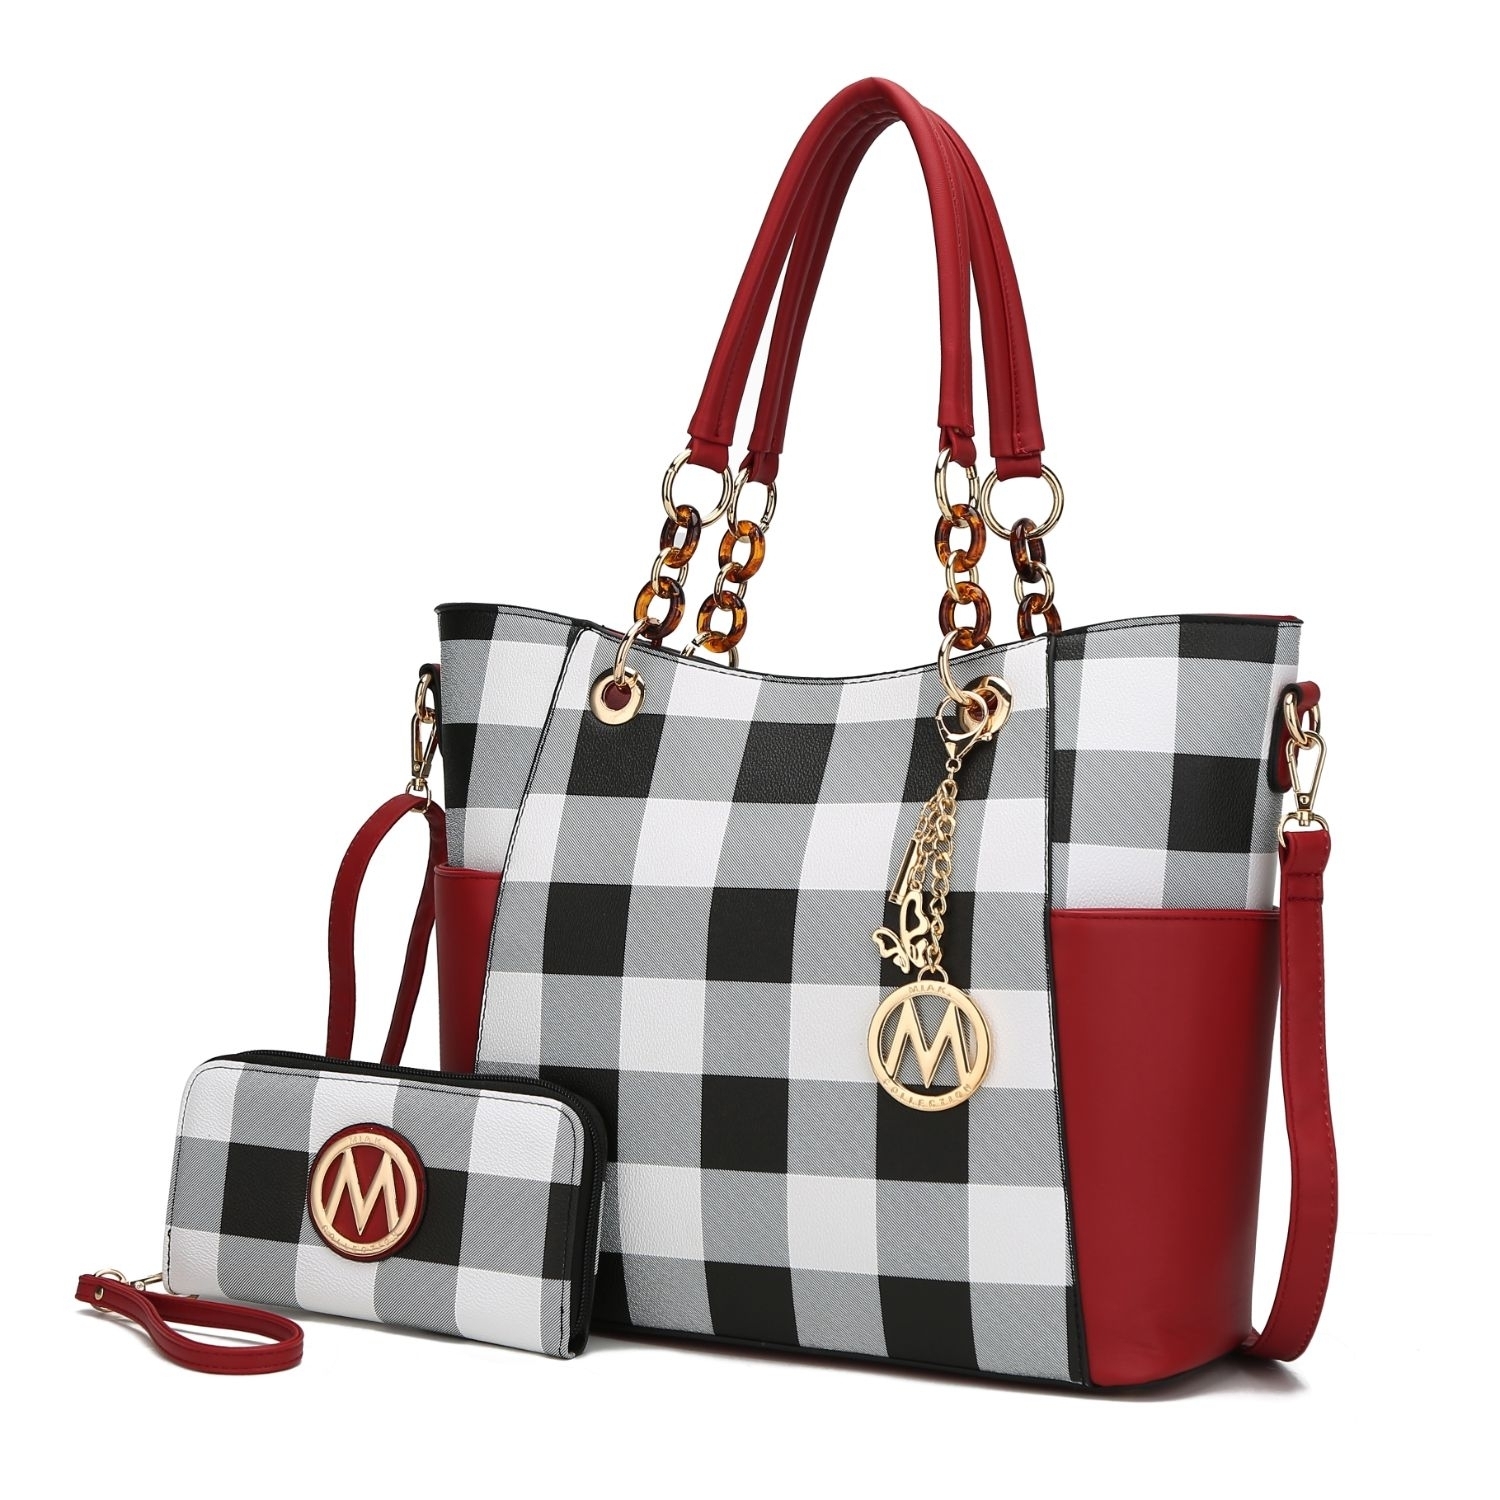 Bonita Checkered Tote 2 Pcs Wome's Large Handbag With Wallet And Decorative M Keychain By Mia K. - Red